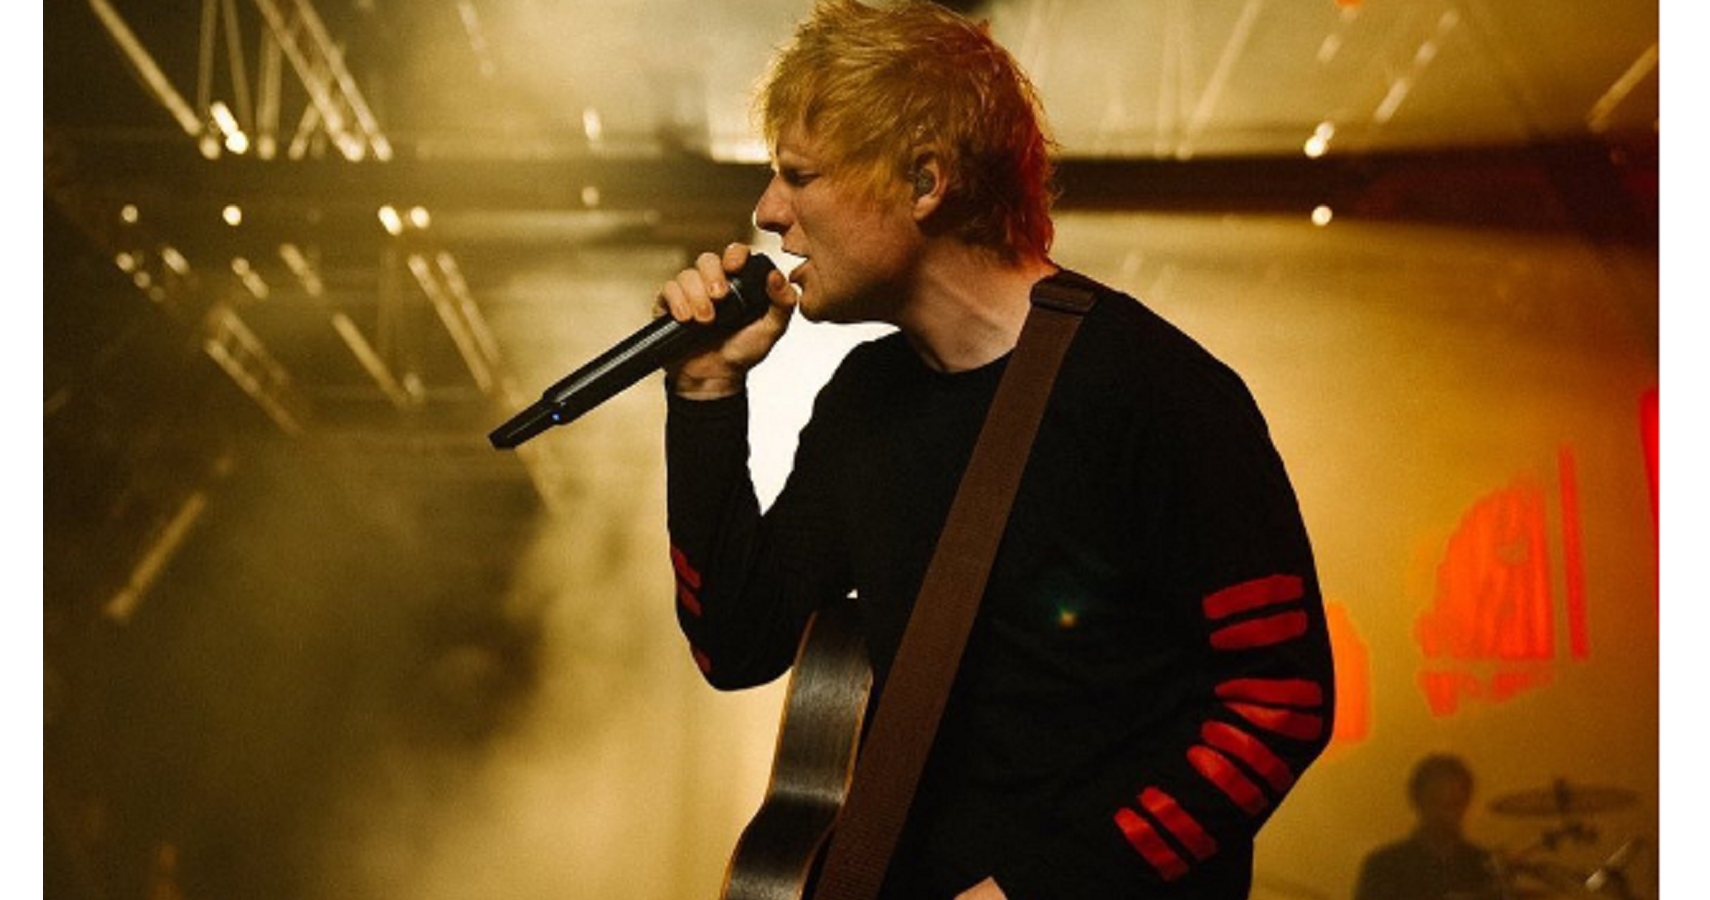 Ticking It Loud: 10 Watches In Ed Sheeran's $6 Million Collection